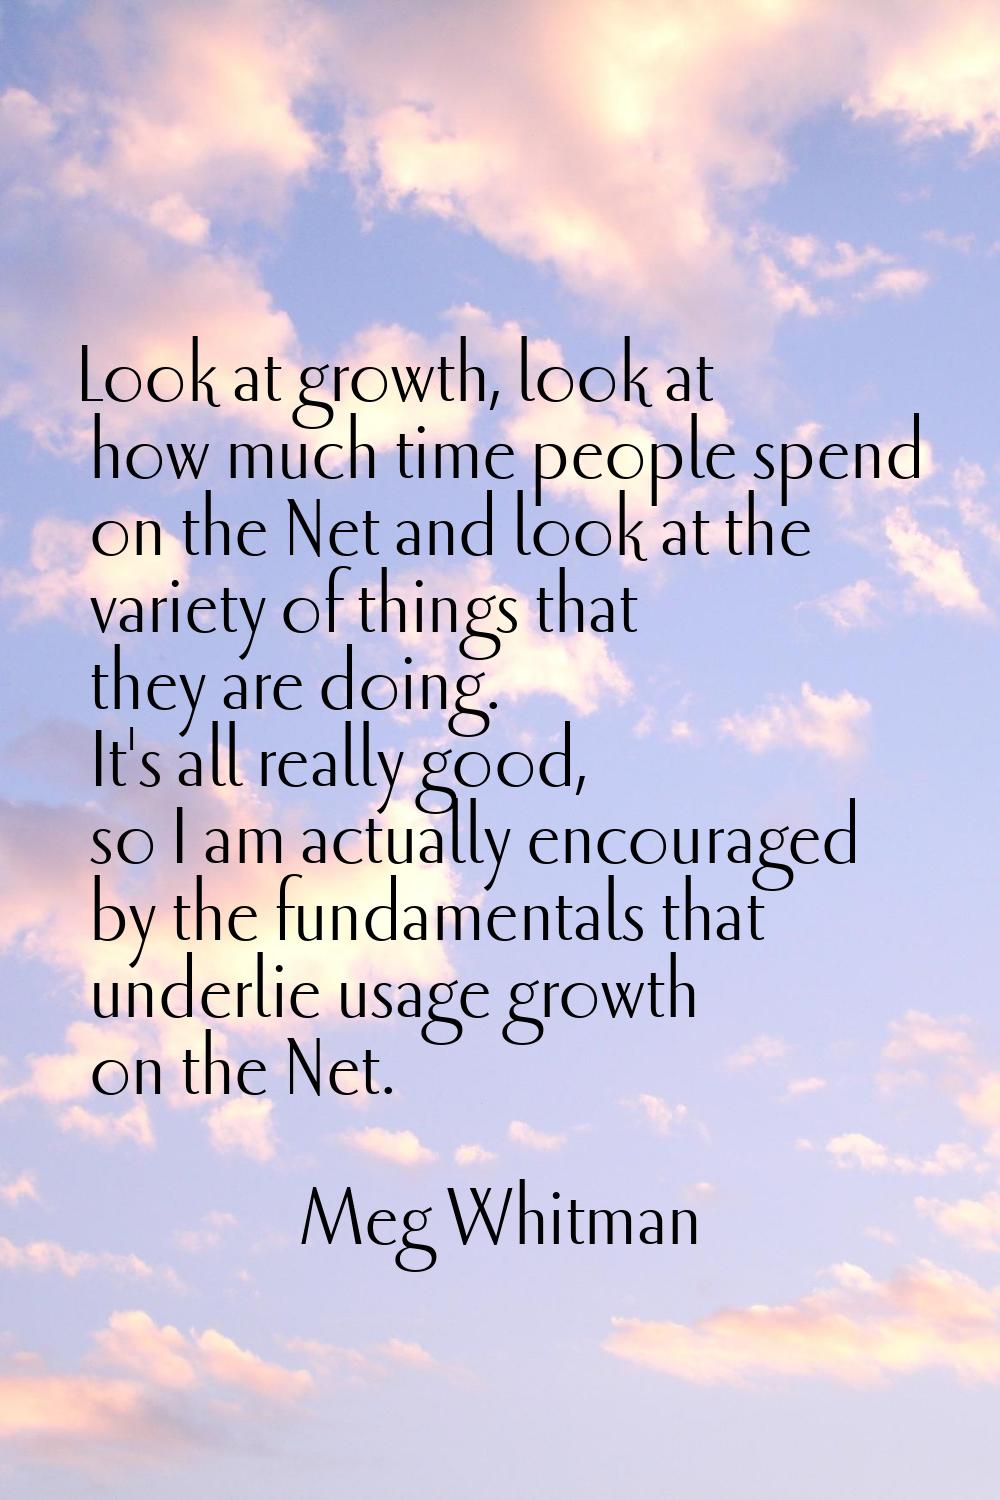 Look at growth, look at how much time people spend on the Net and look at the variety of things tha